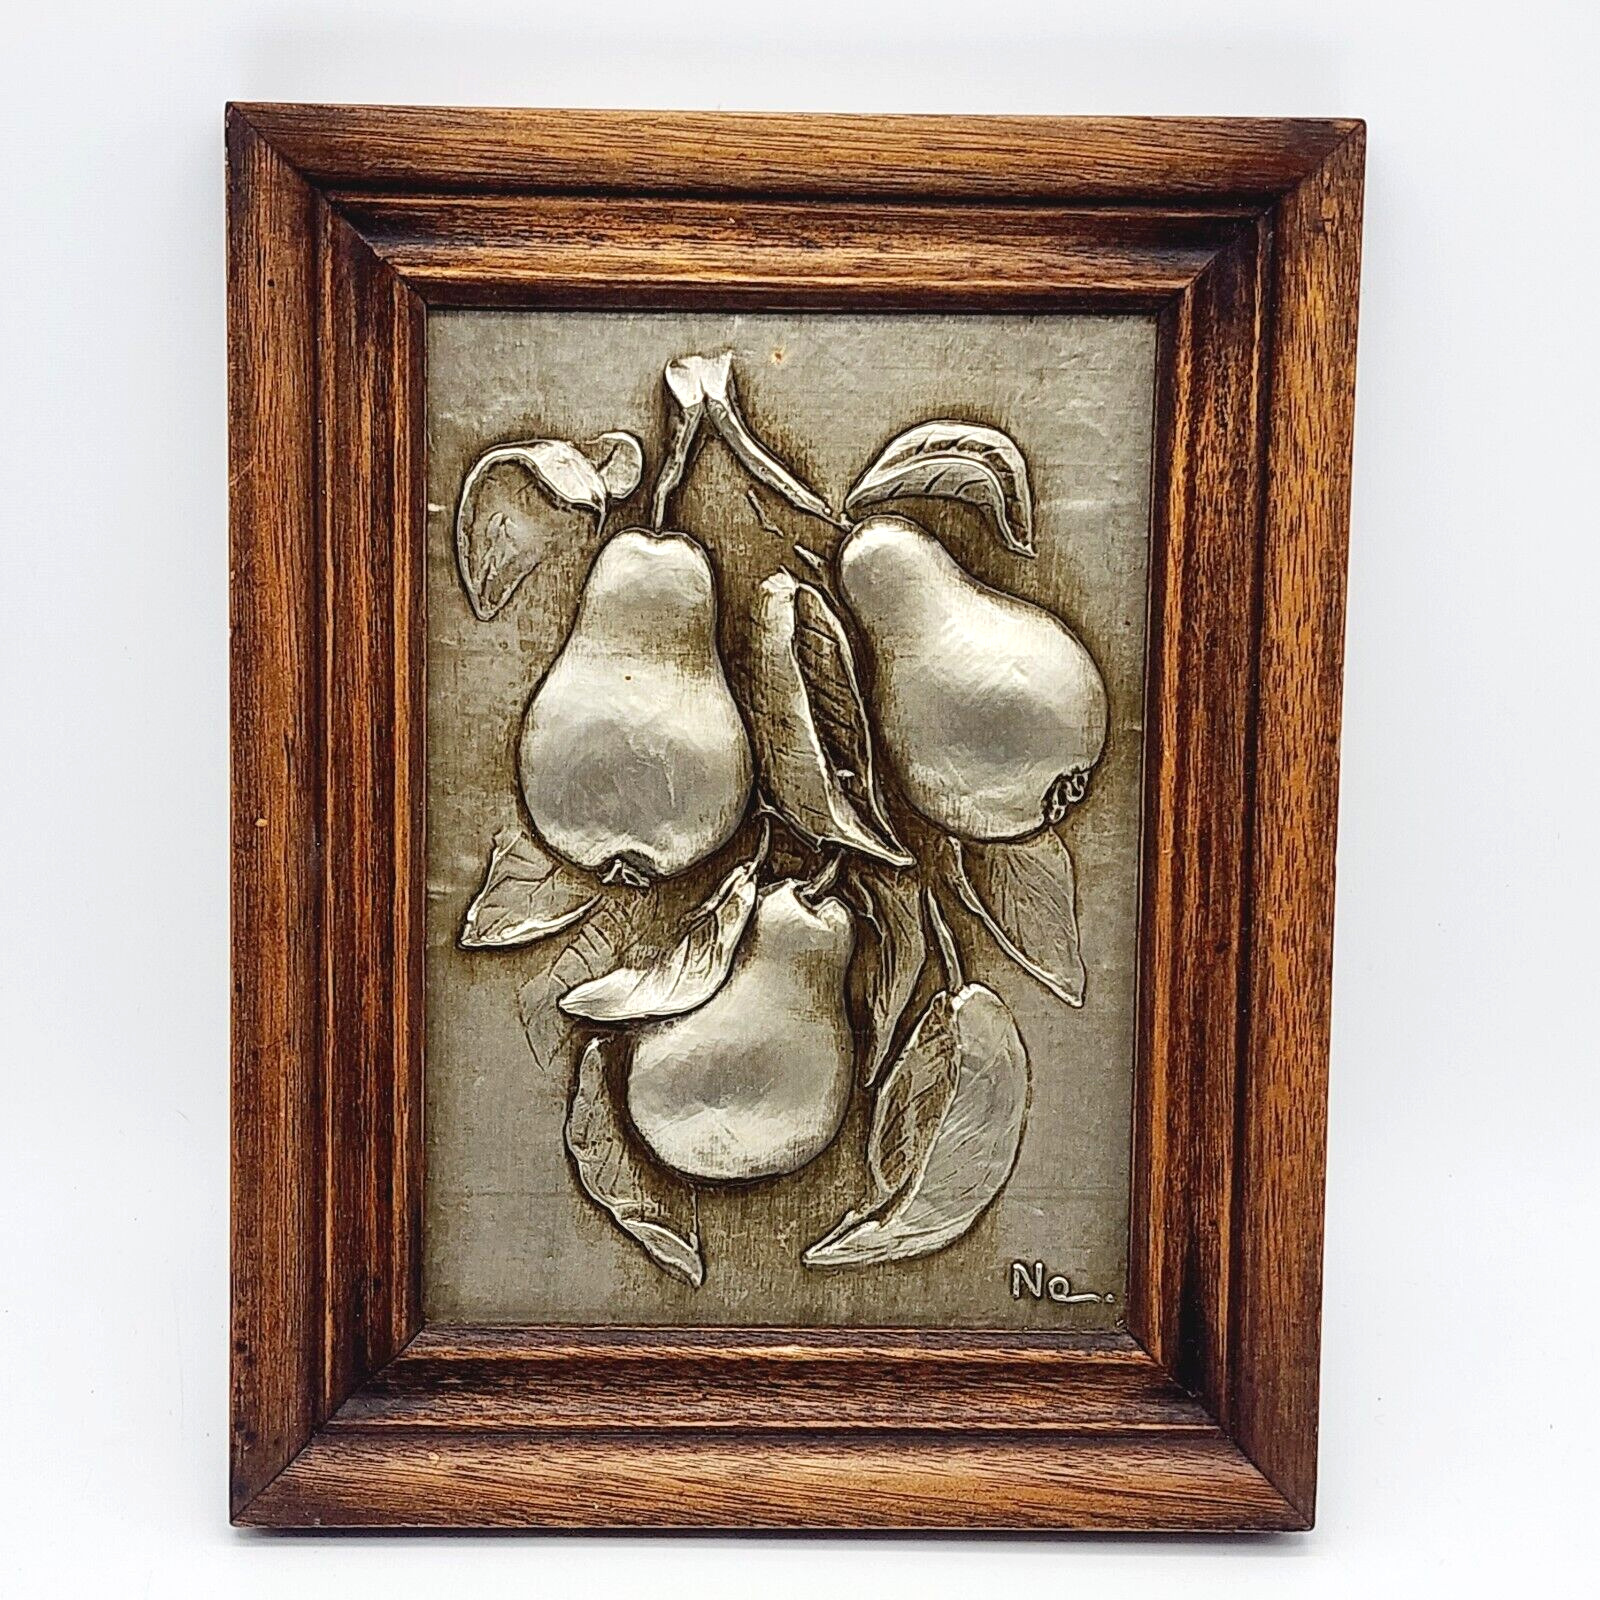 Vintage Copper Relief Embossed Wall Art Picture Pears Fruit Wood Frame Signed